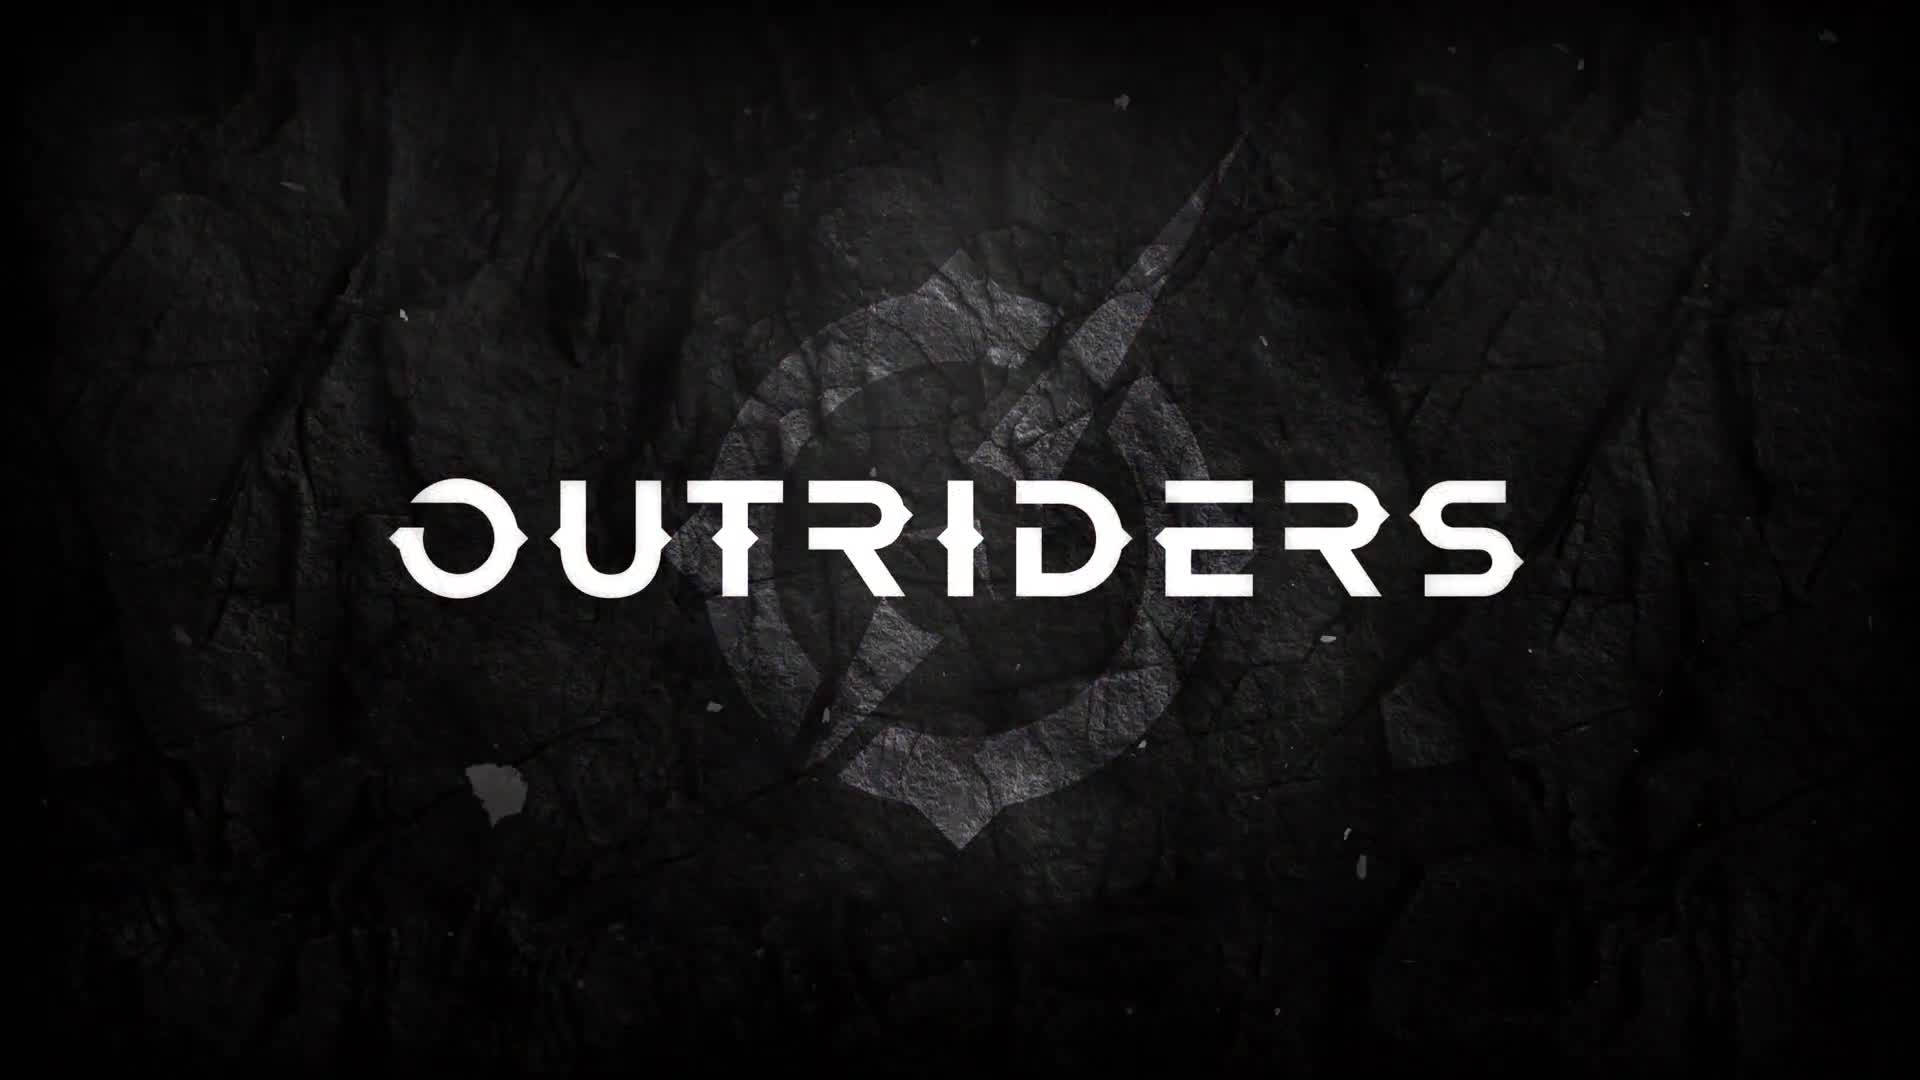 Join the Outriders in their Expedition to the Unknown Wallpaper